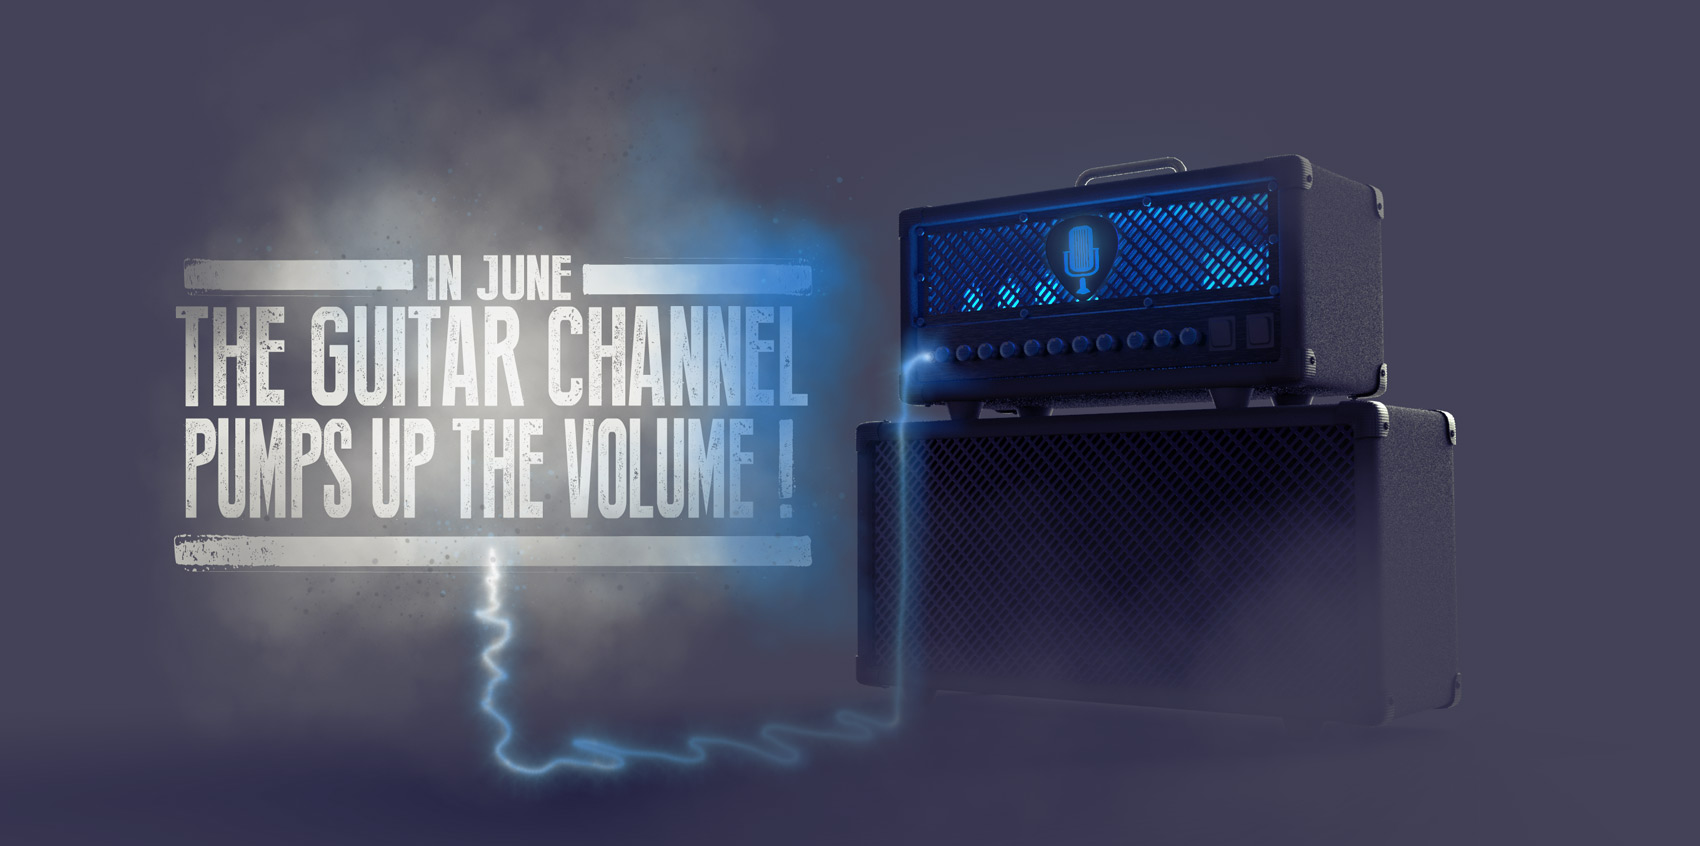 In June, The Guitar Channel pumps up the volume!